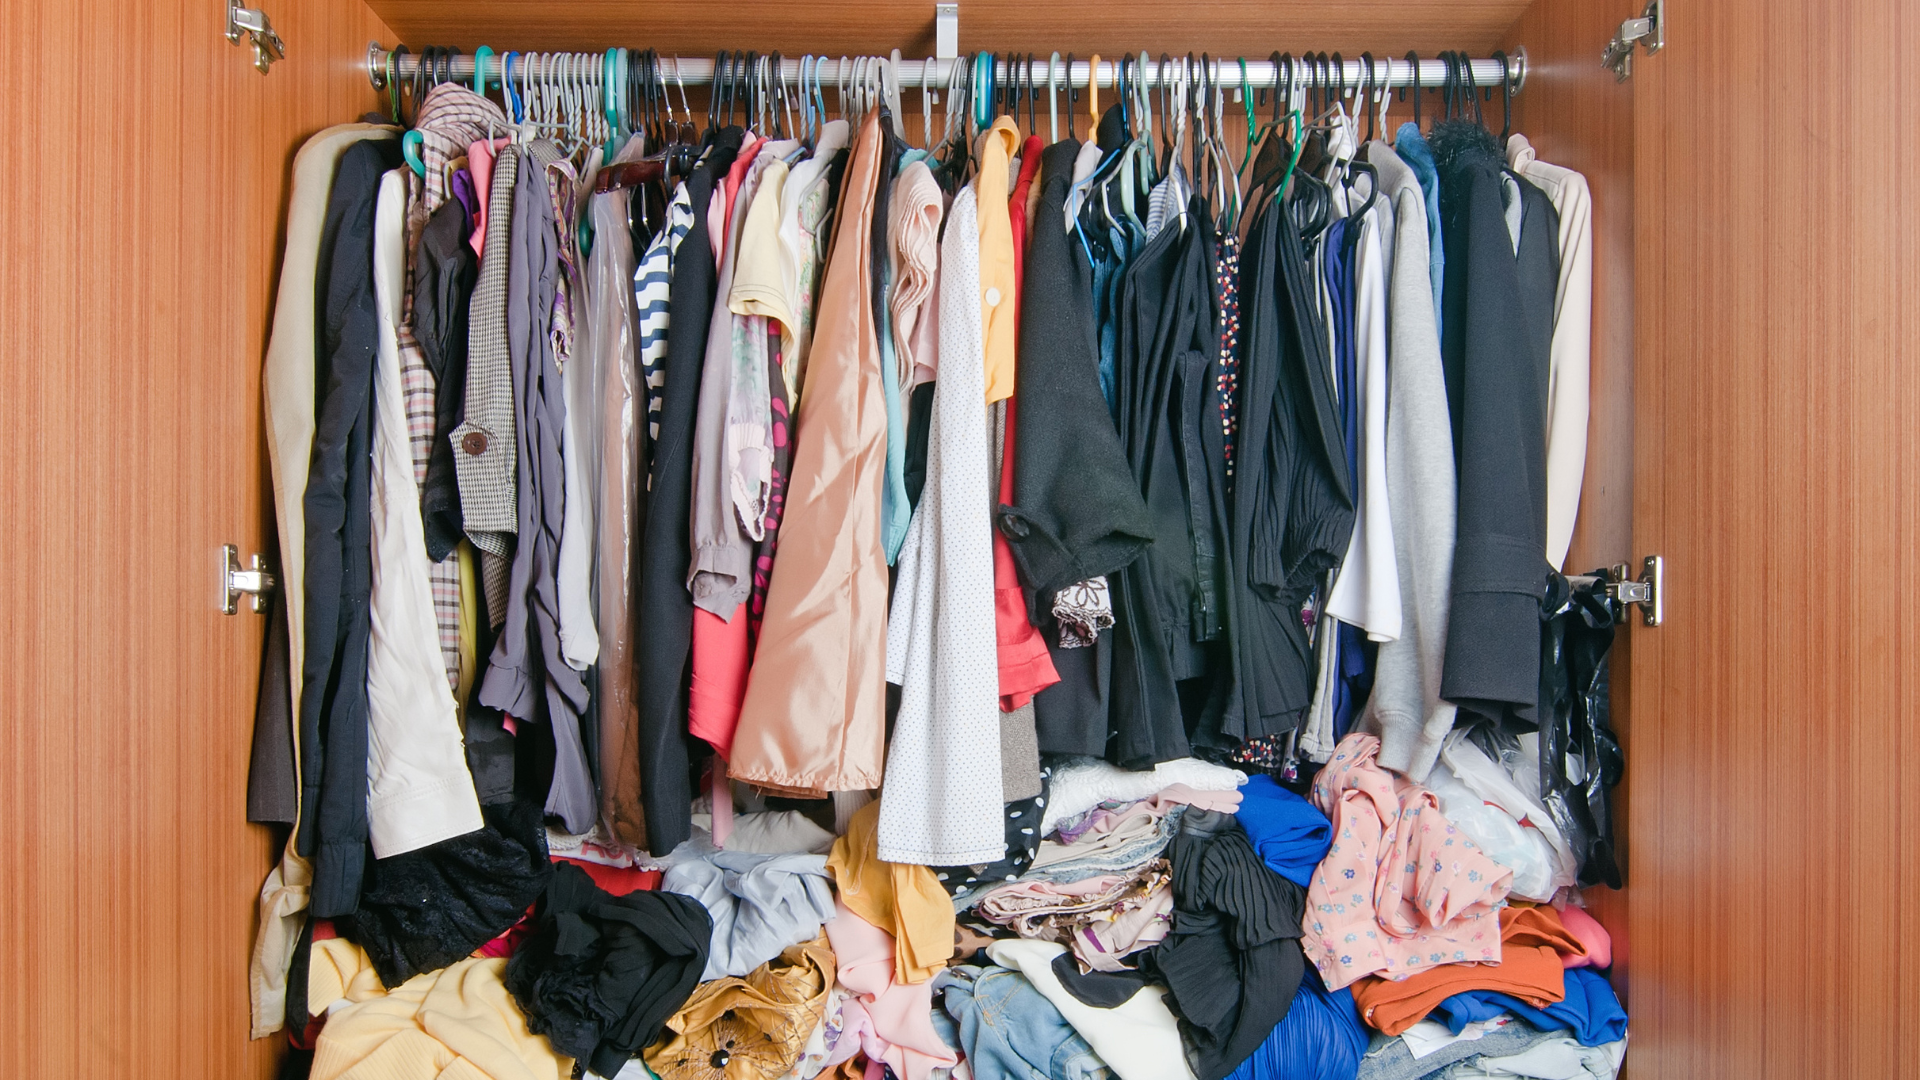 The Best Kinds of Hangars for a Small Closet [Video]